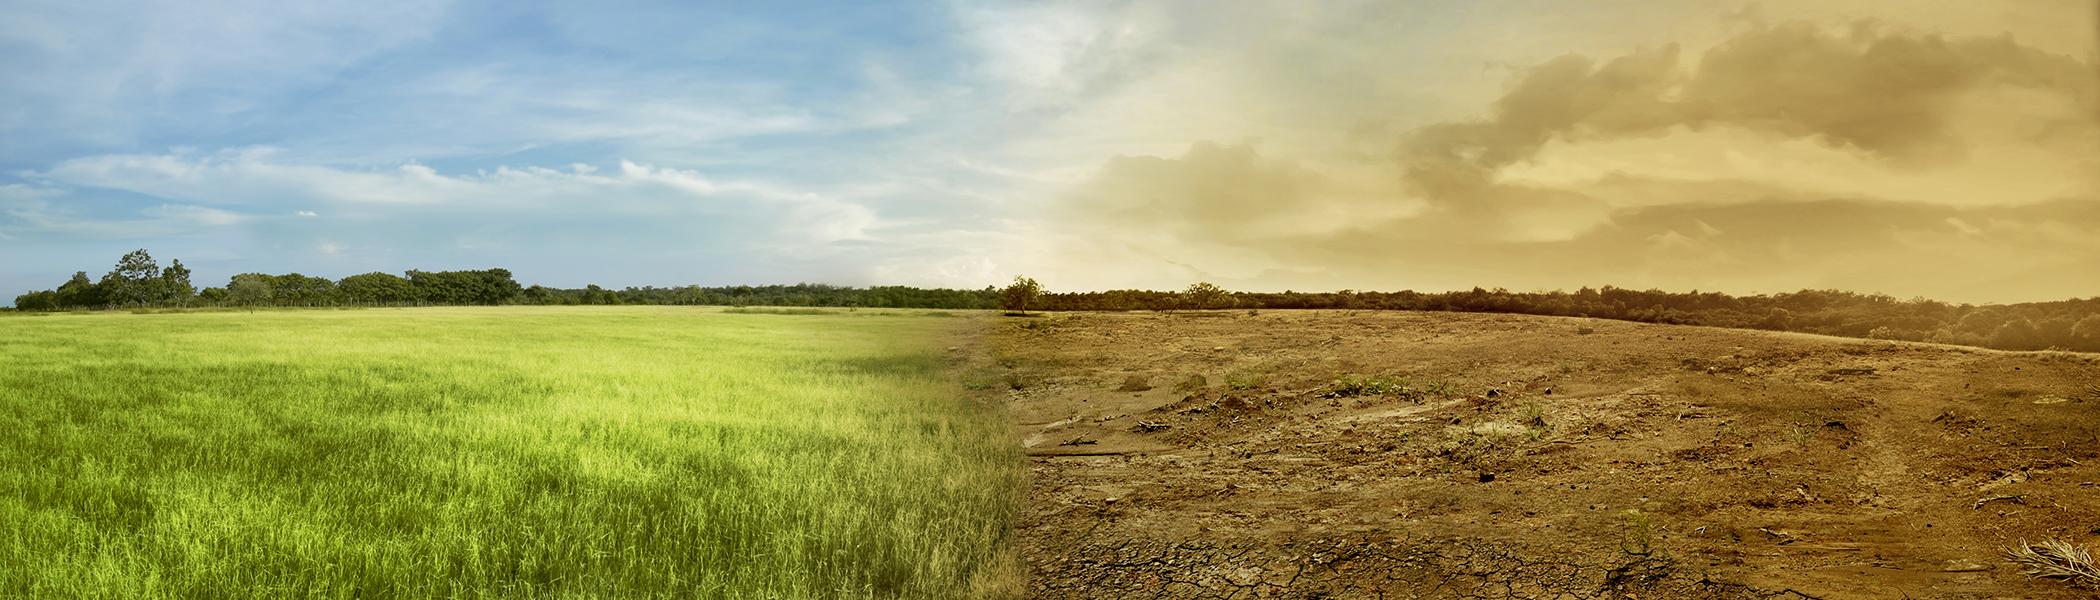 Landscape image of a green healthy field merged in the centre with a dry unhealthy field. 